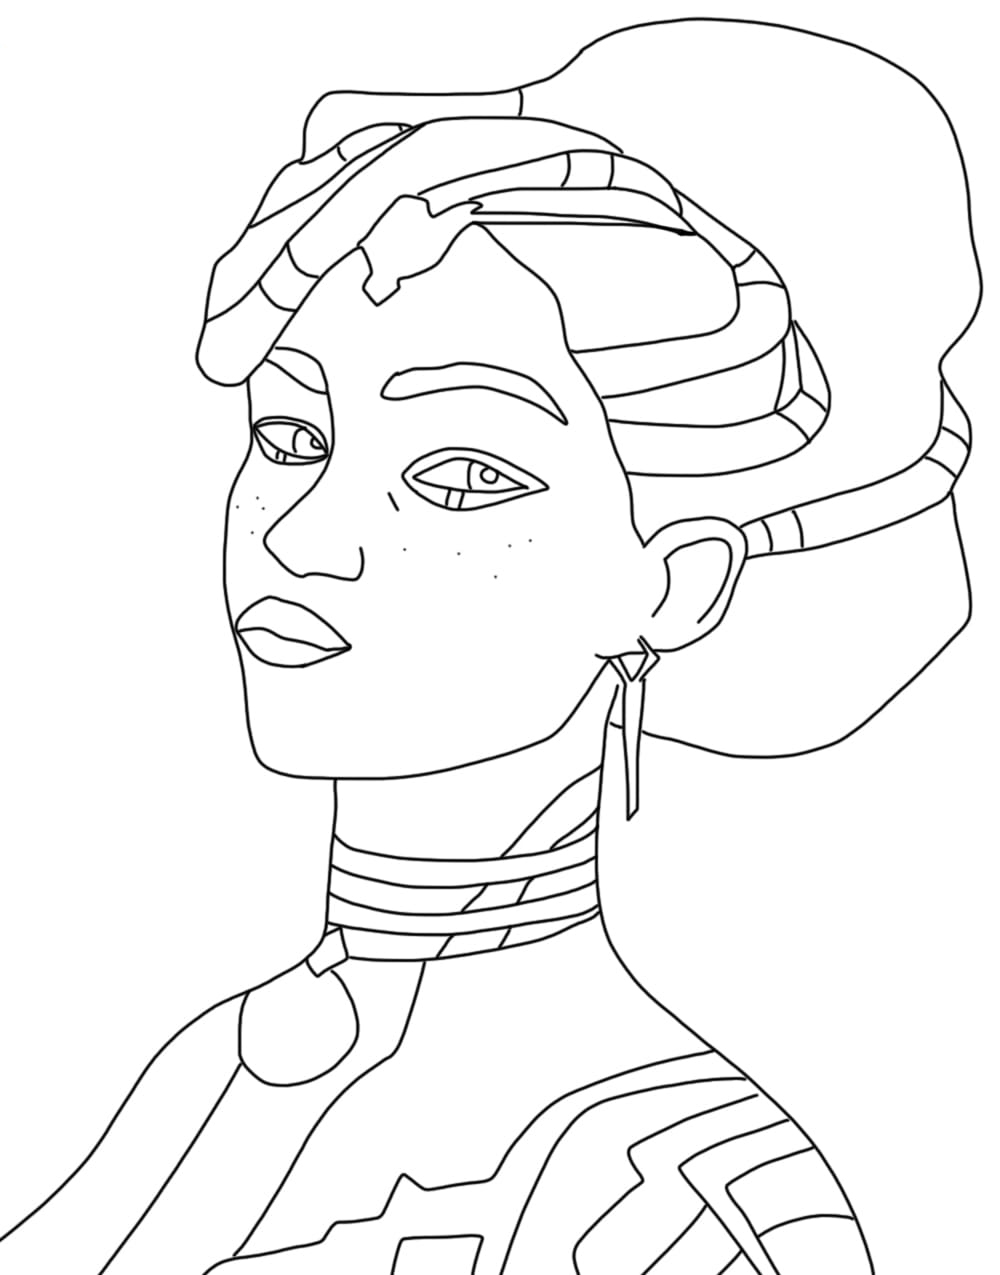 Coloring Pages Arcane | Print Free